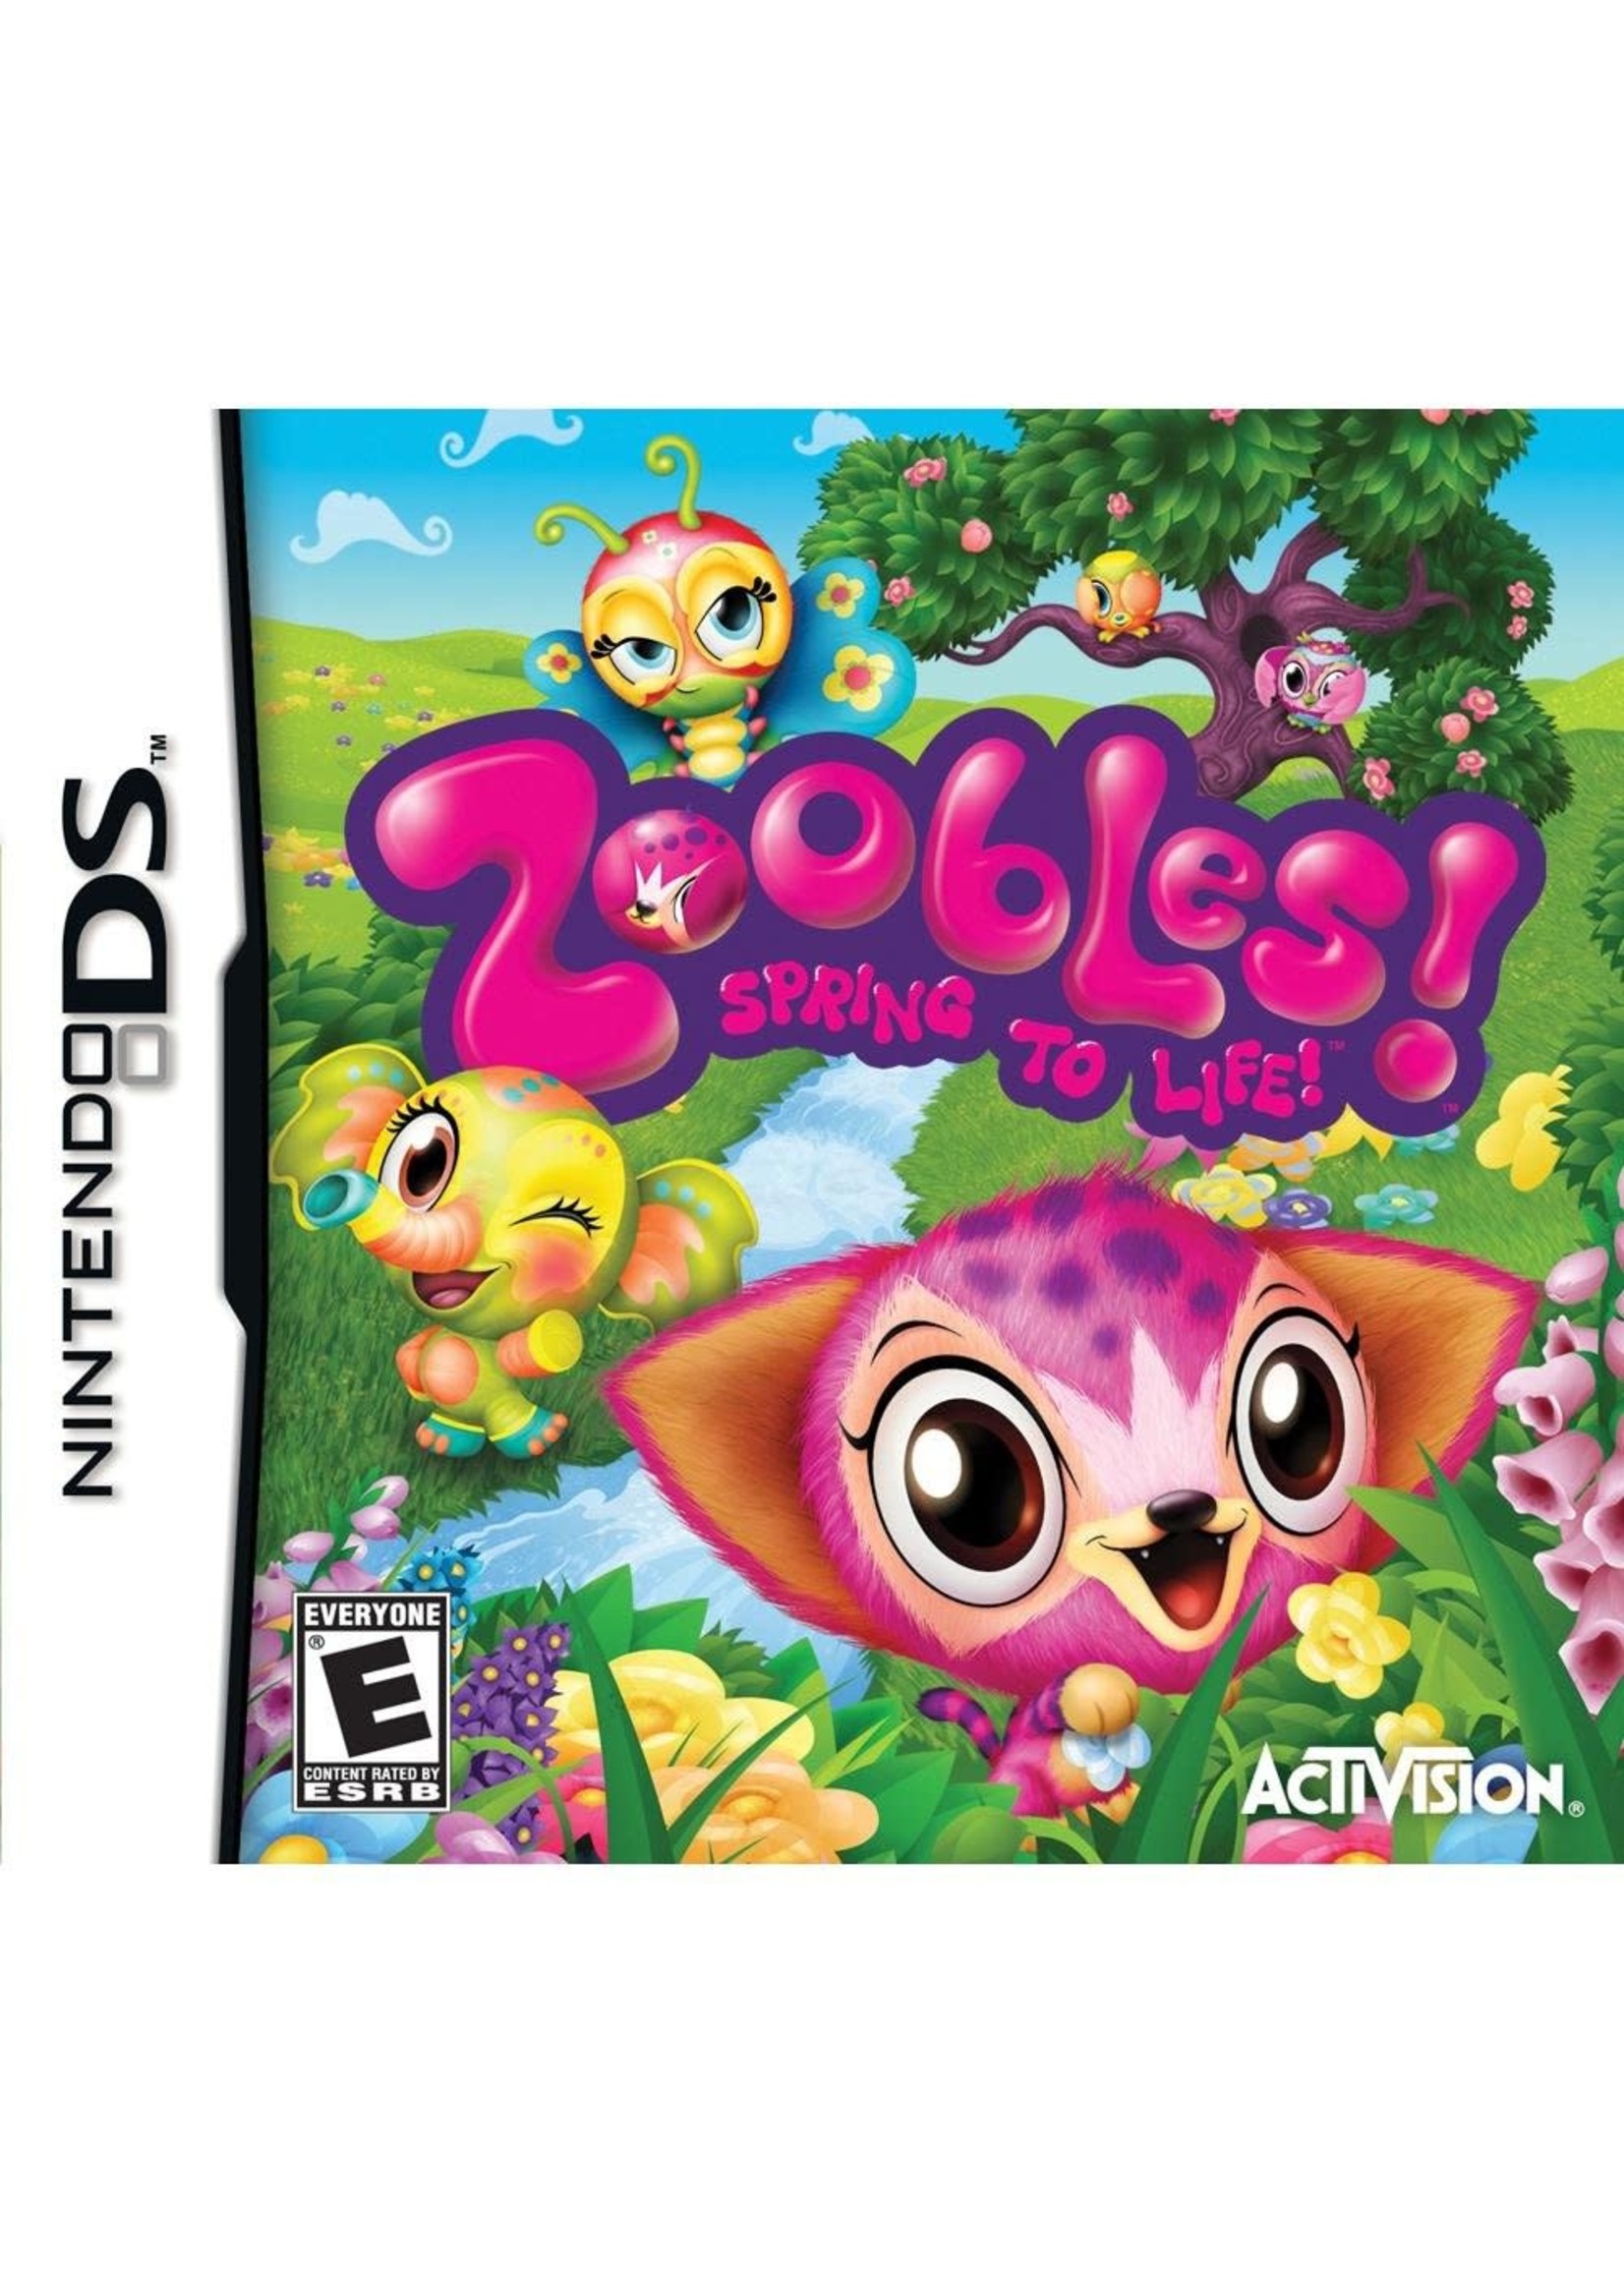 Nintendo DS Zoobles! Spring to life - Cart Only